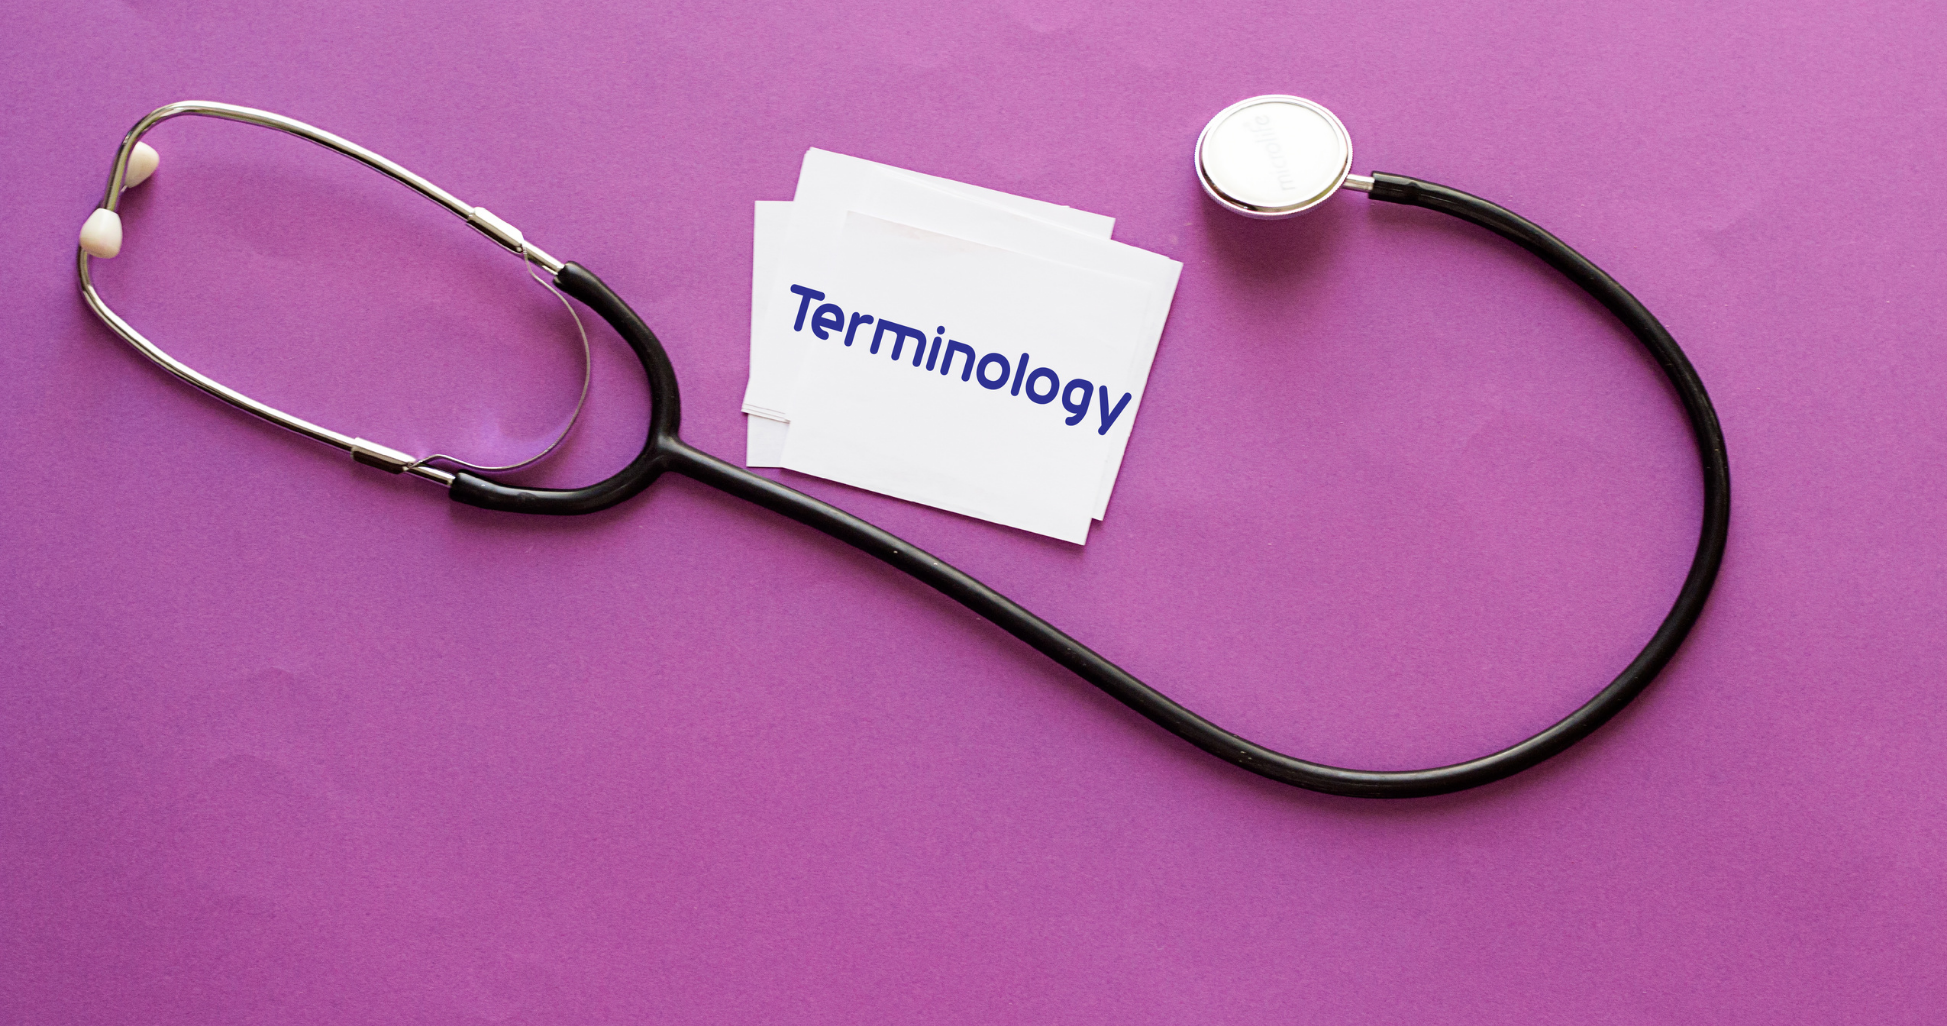 You are currently viewing Fertility and IVF Terminology Glossary